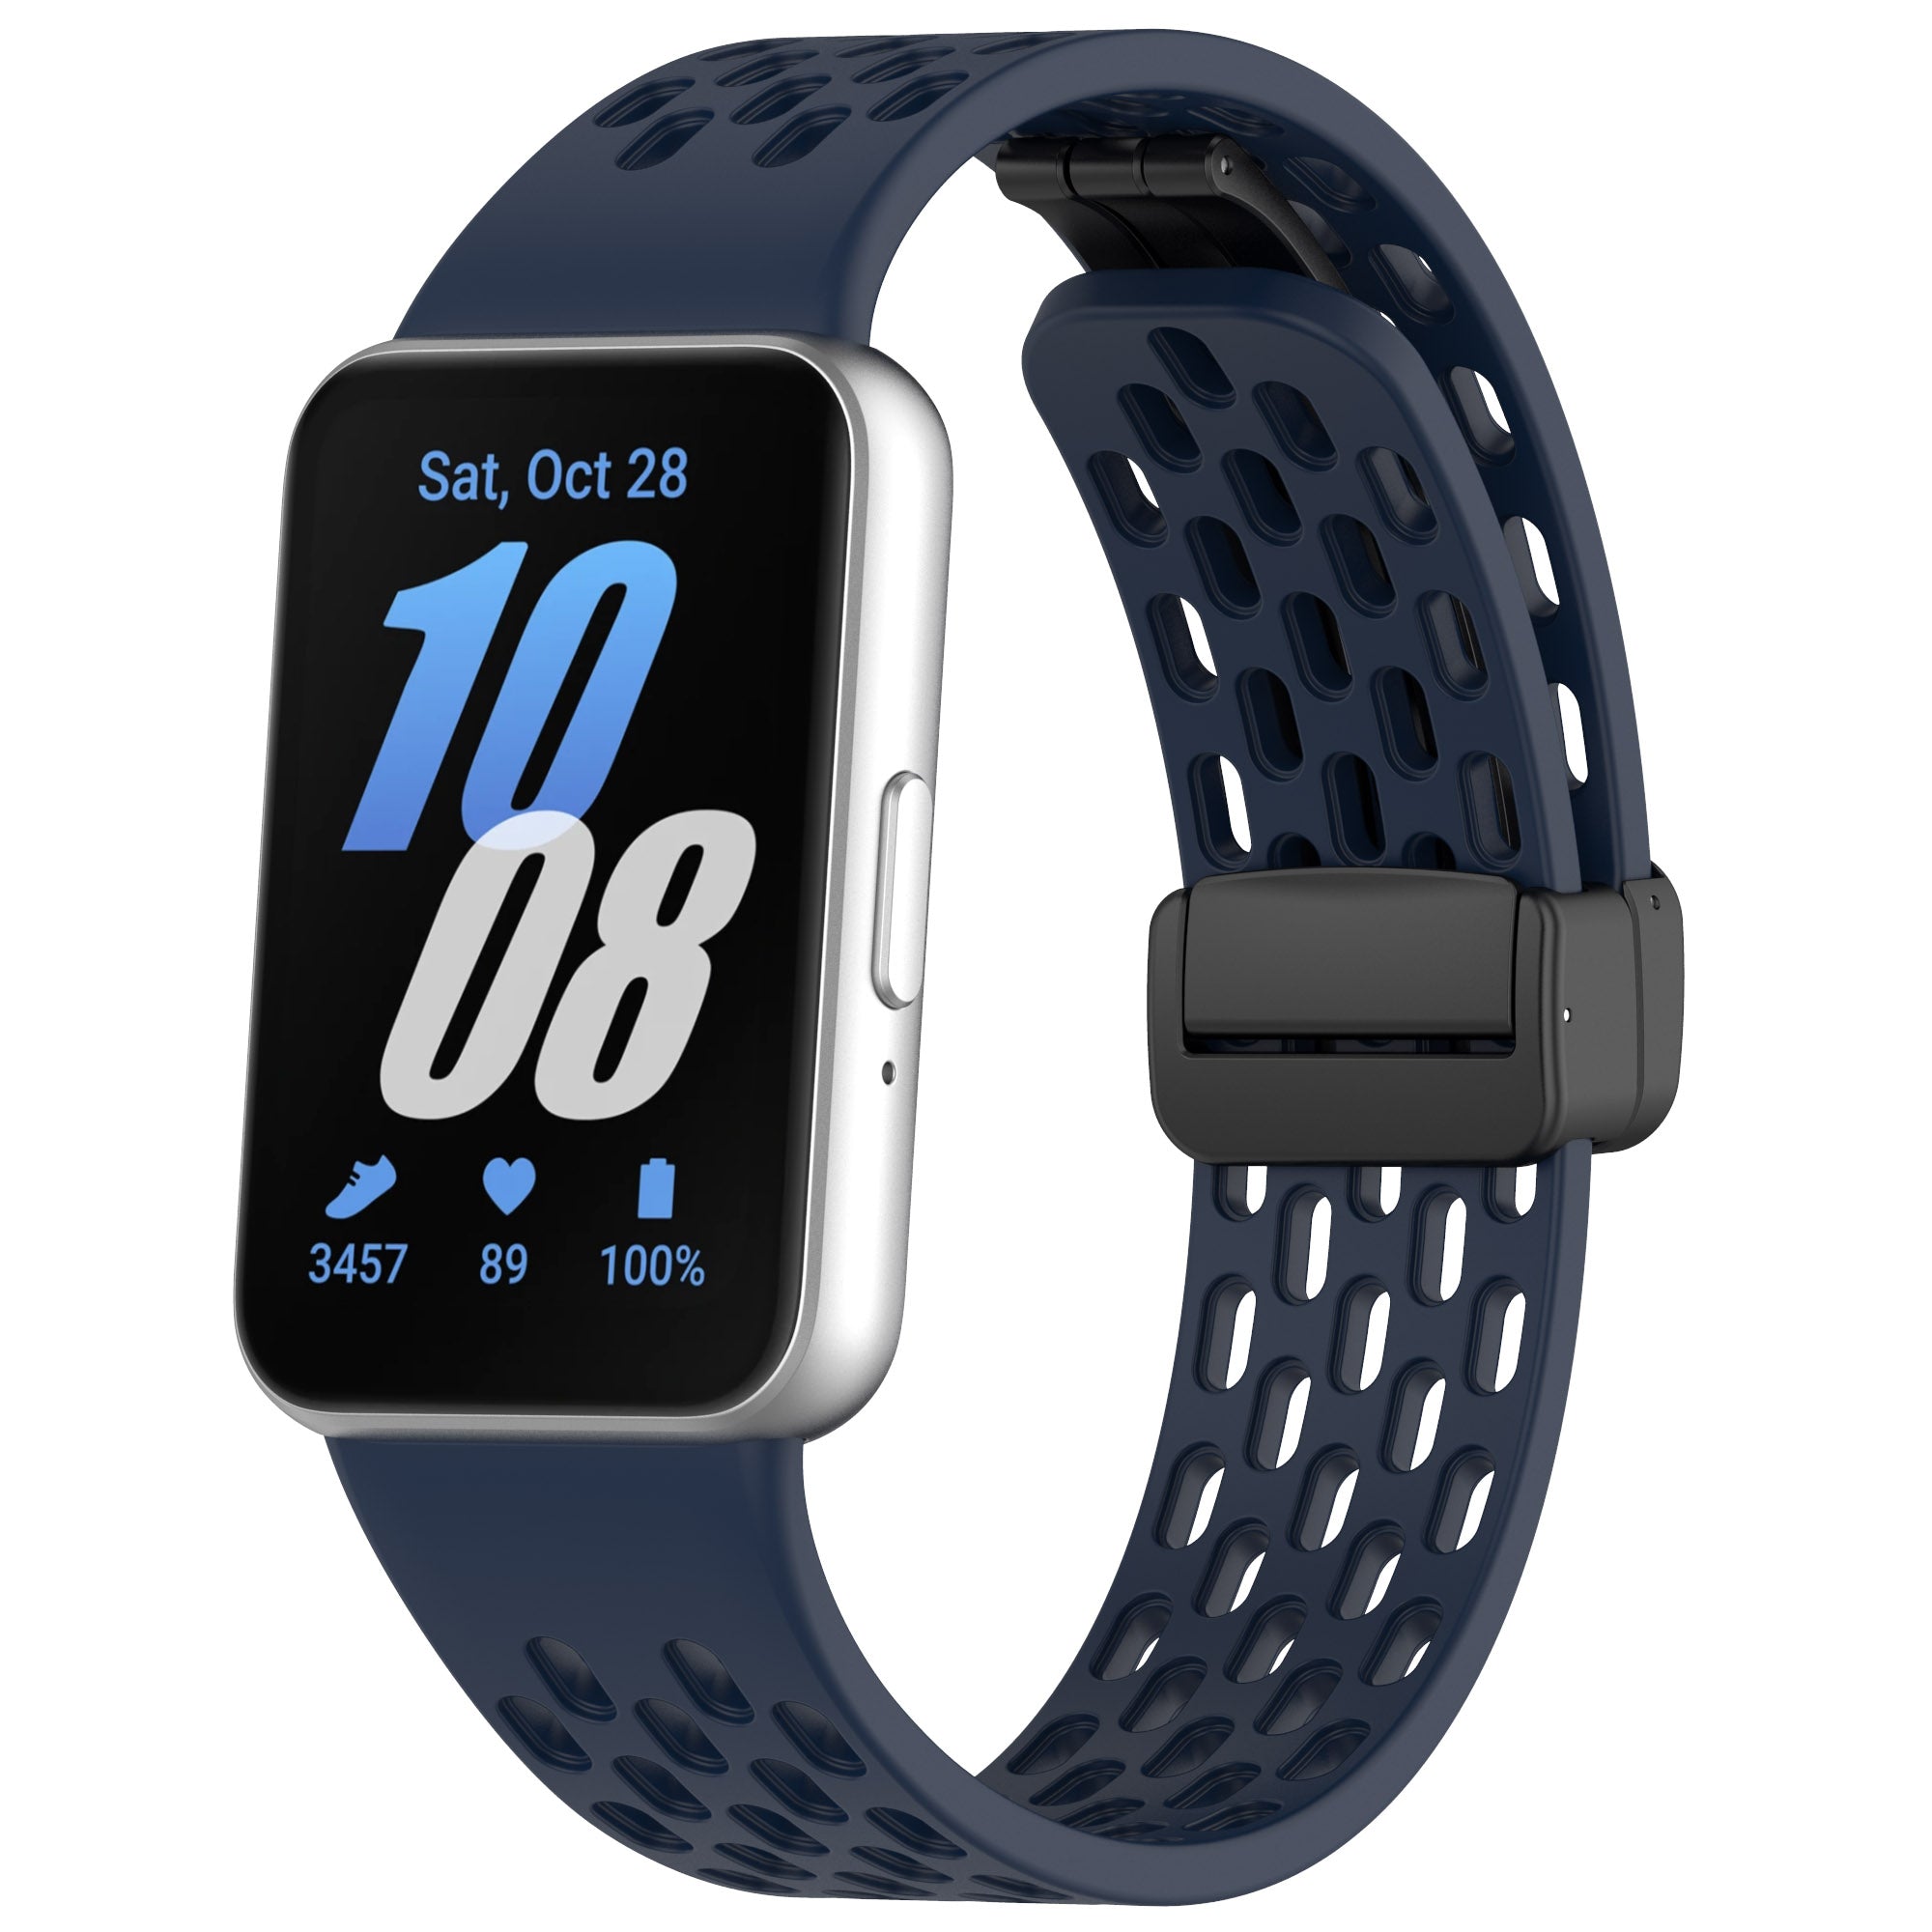 Wrist Band for Samsung Galaxy Fit3 R930 Magnetic Silicone Smartwatch Bracelet Strap - Navy Blue